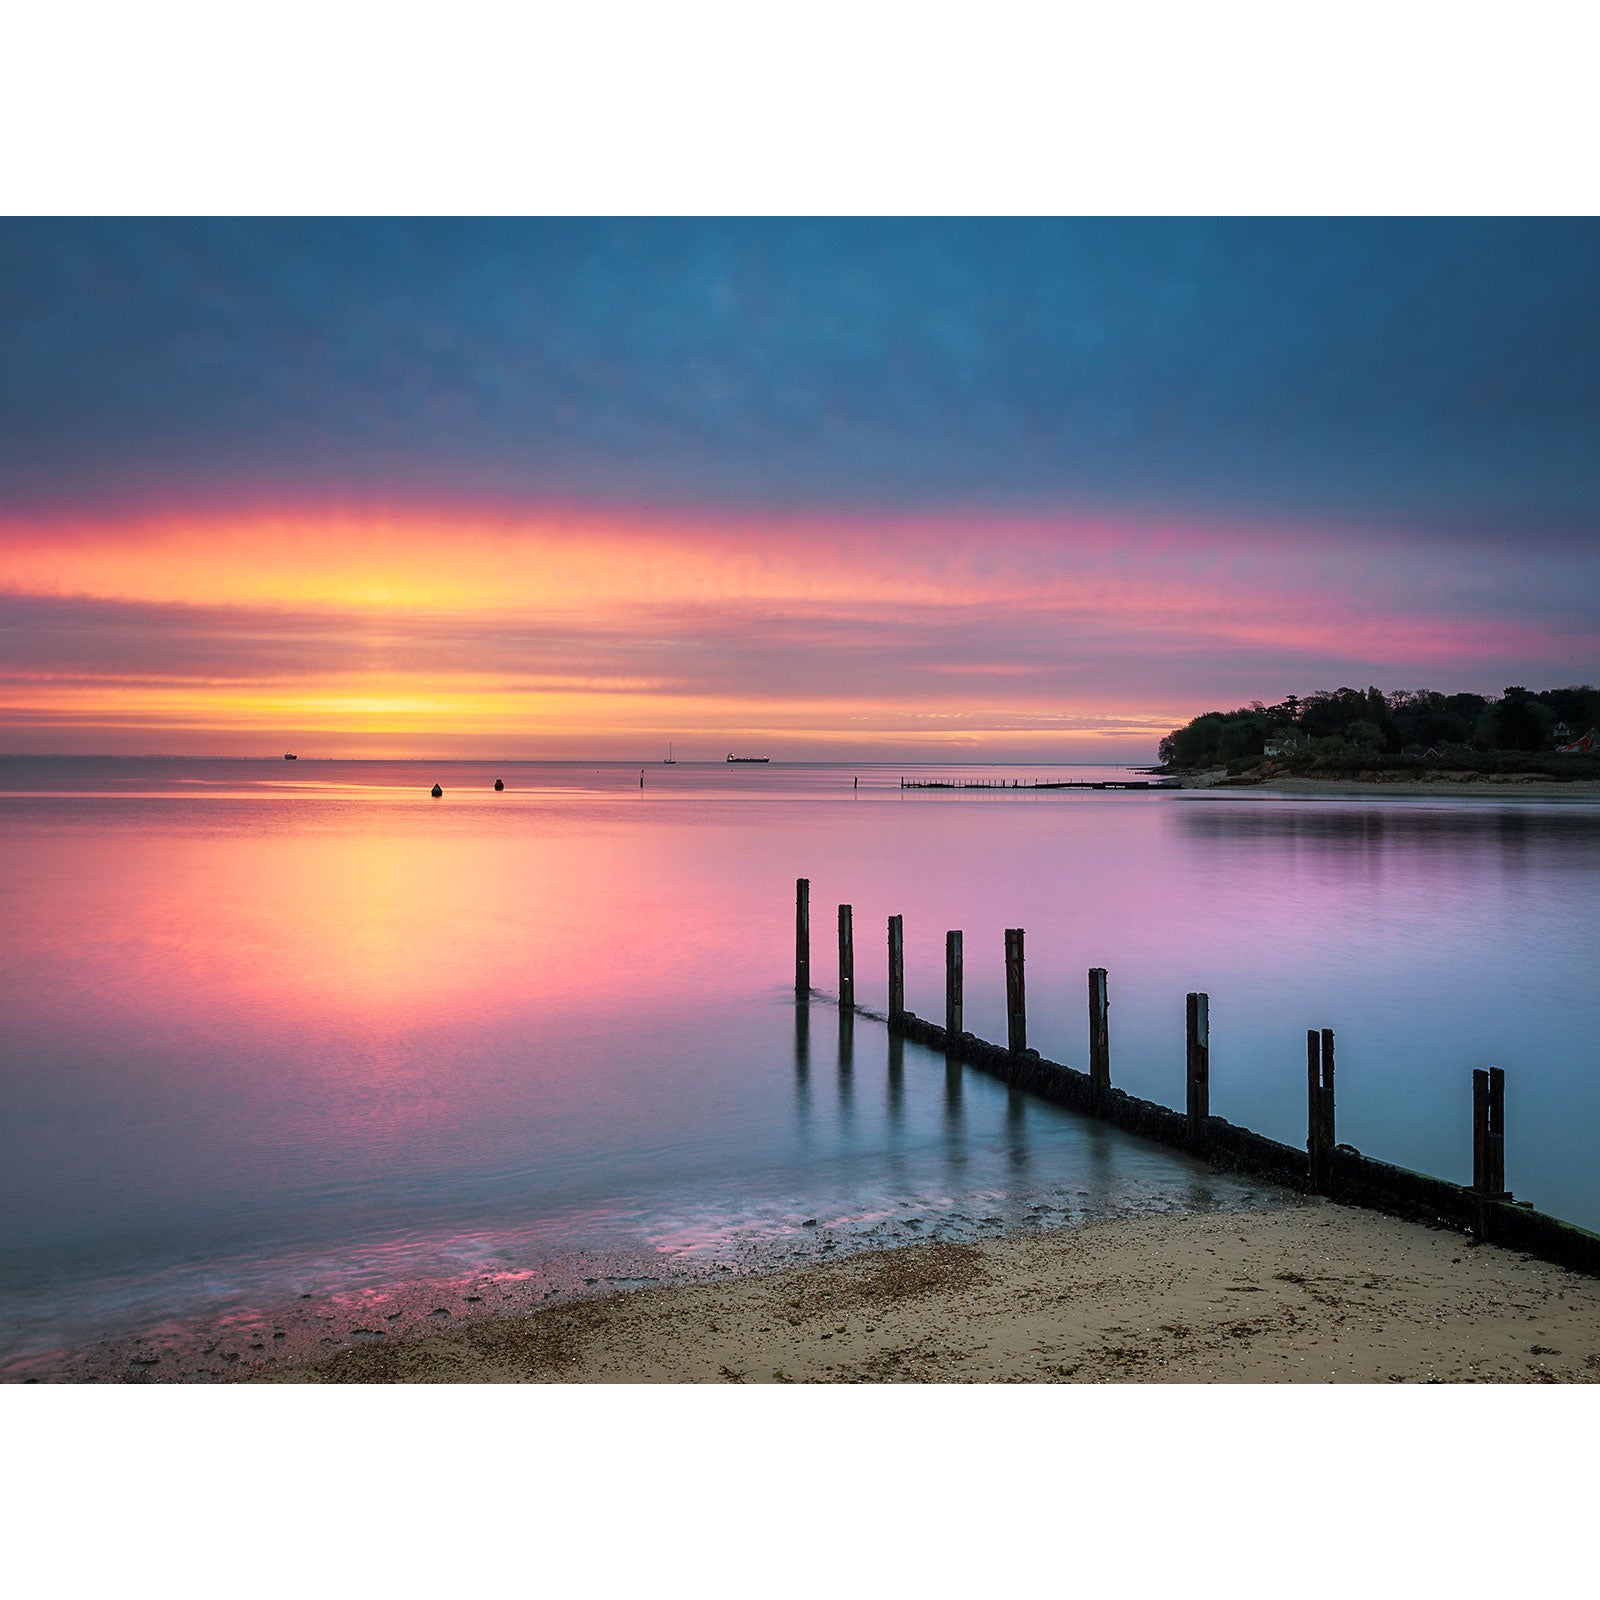 Sunset over a calm St. Helens Beach on Gascoigne Isle with a row of wooden posts leading into the water, captured by Available Light Photography.